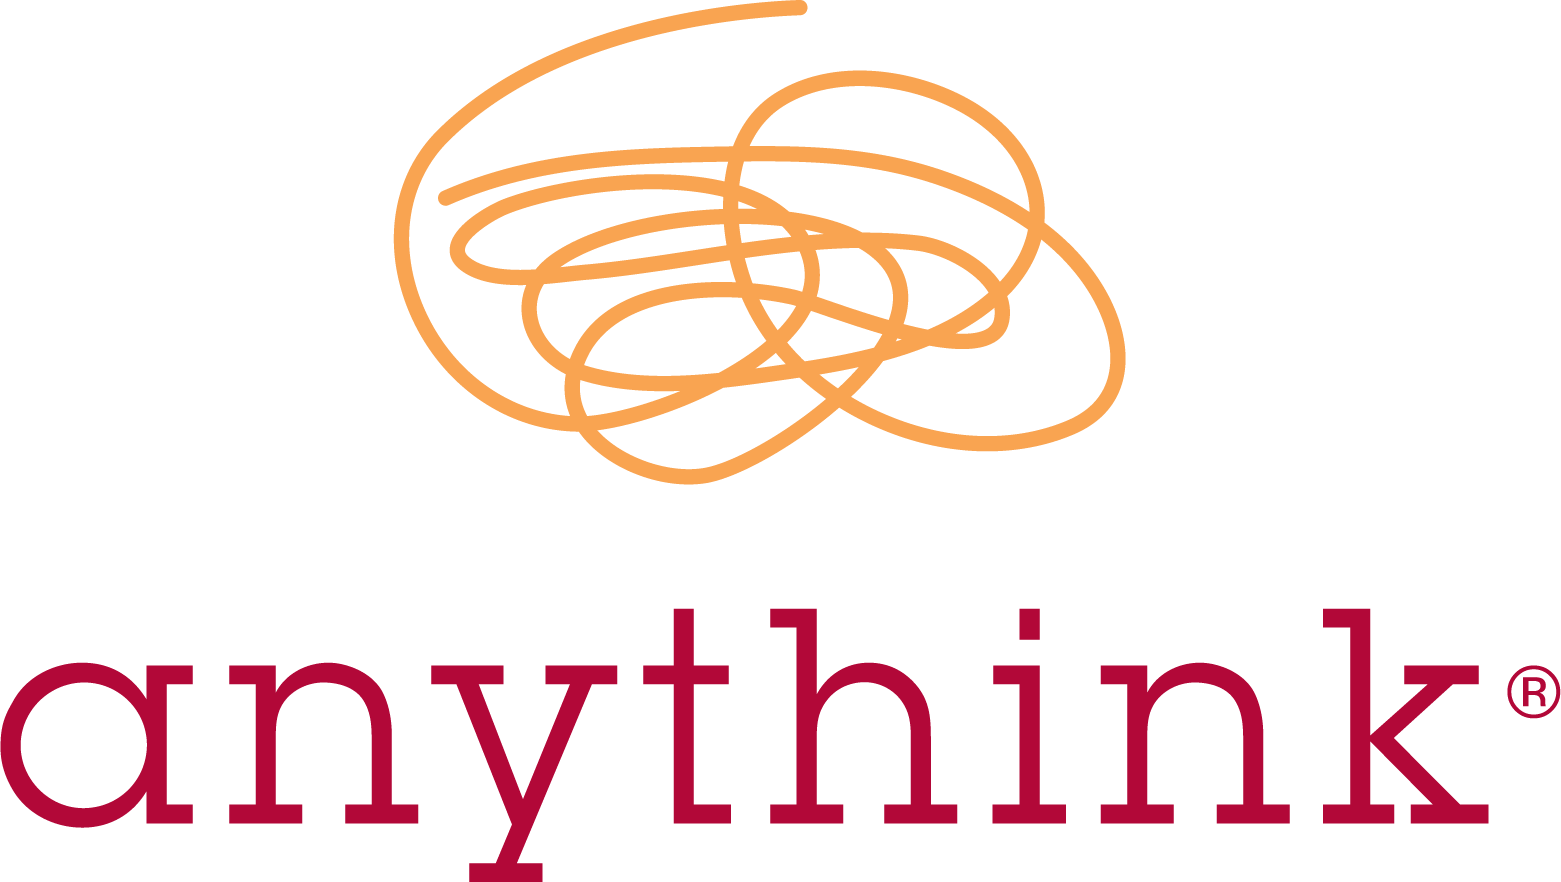 The official Anythink logo